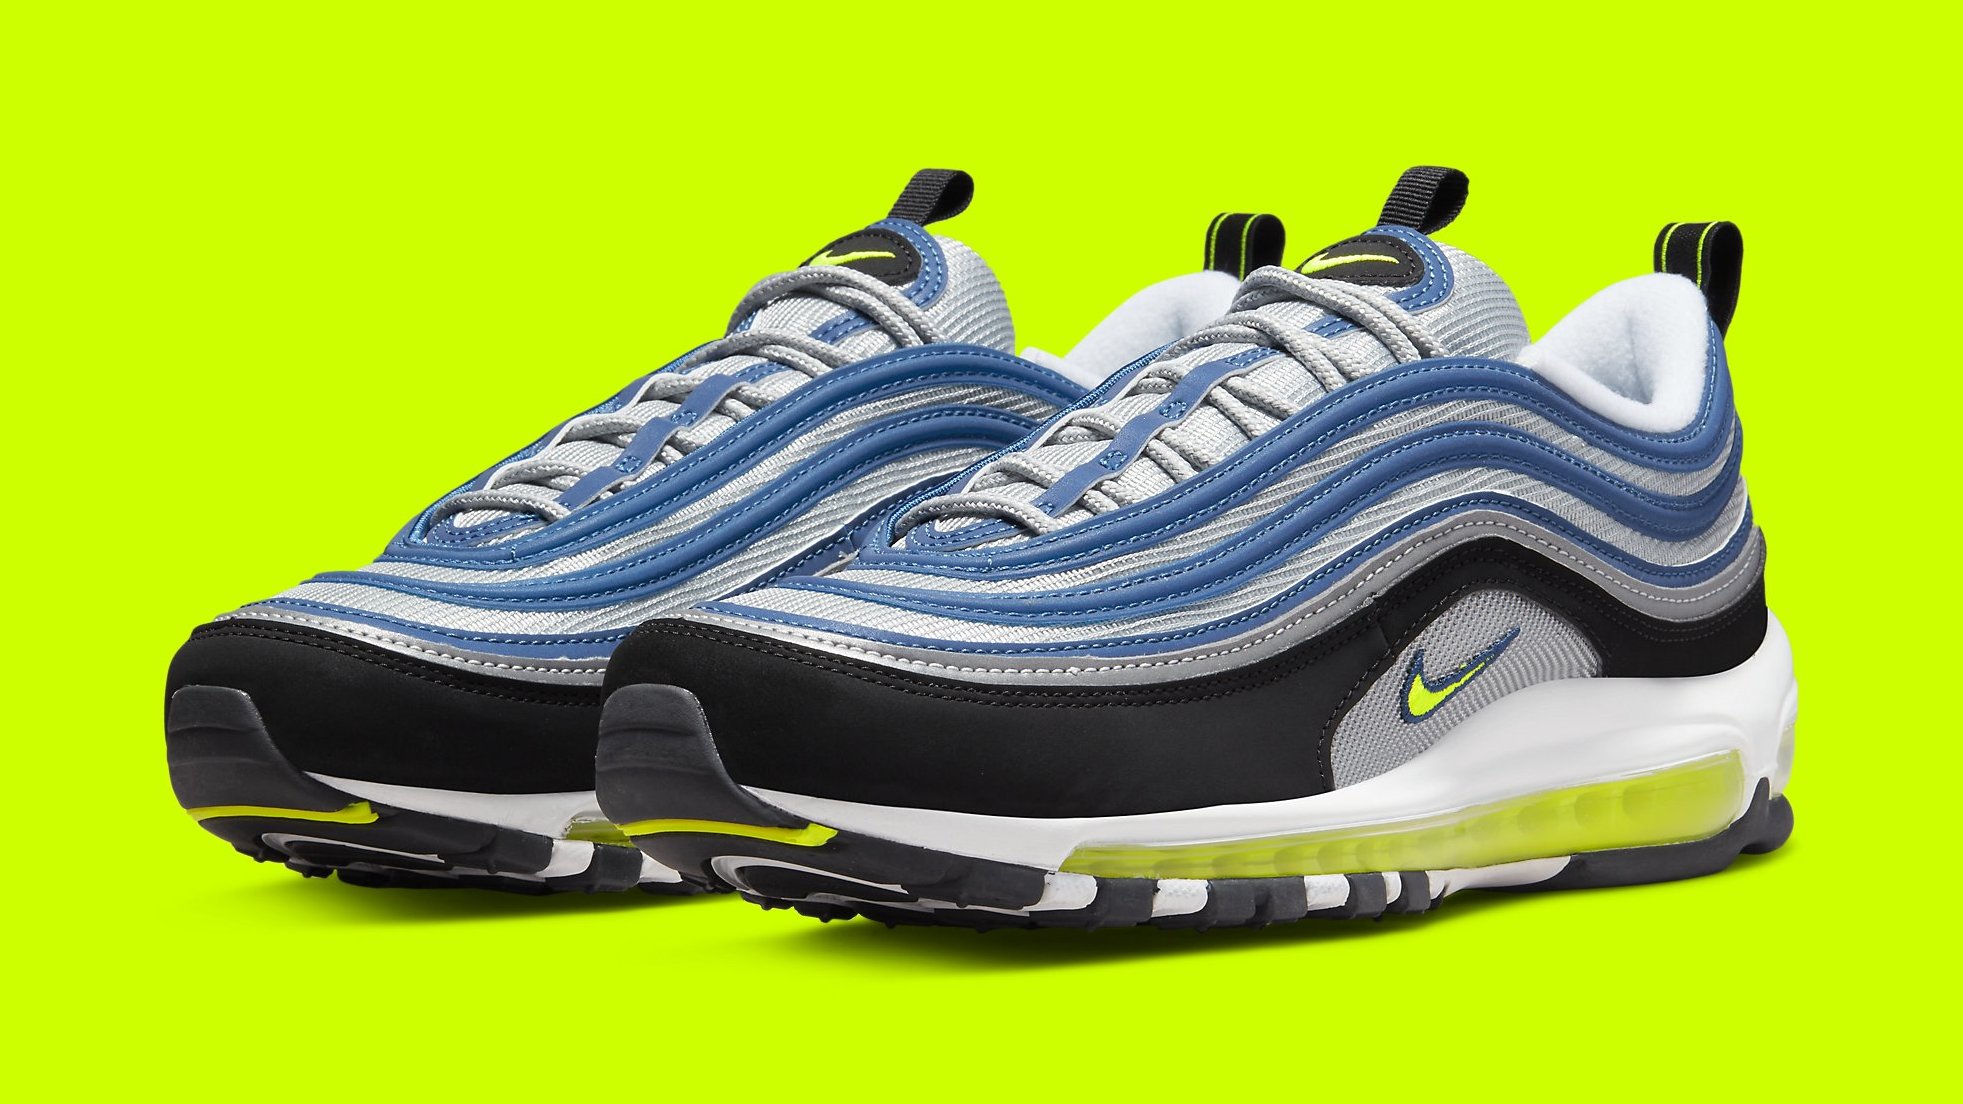 Nike Mixes Original Colorways on This Air Max 97 | Complex